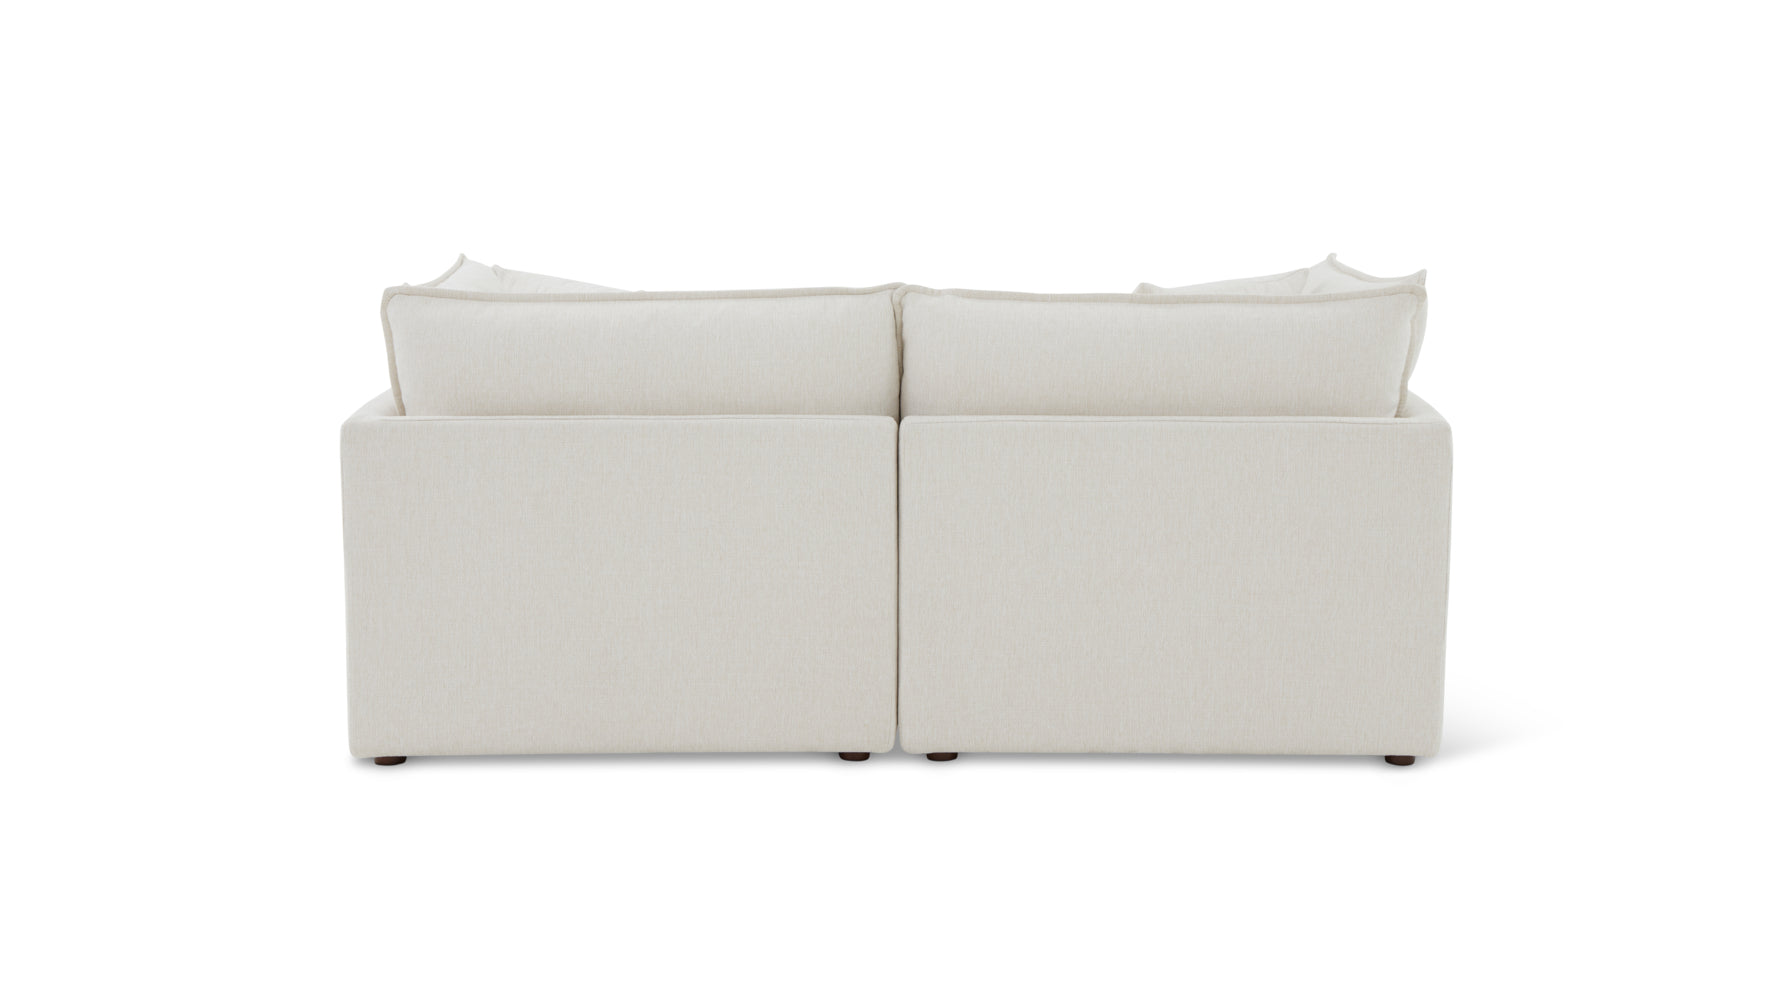 Chill Time 3-Piece Modular Sectional, Birch - Image 6